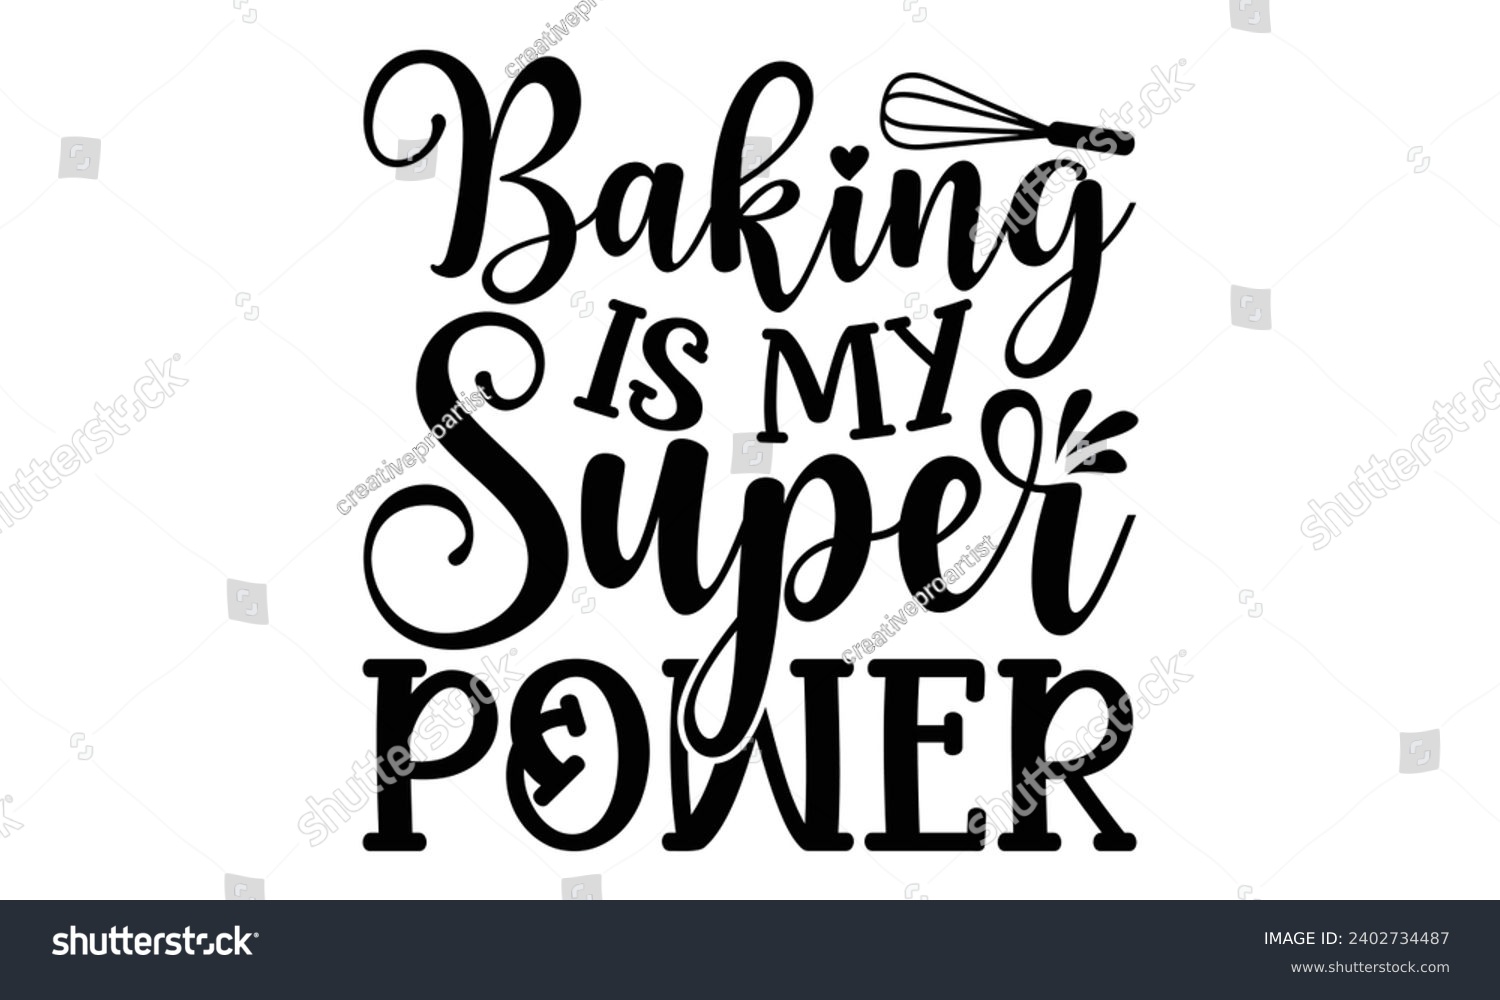 SVG of Baking Is My Super power- Baking t- shirt design, This illustration can be used as a print on Template bags, stationary or as a poster, Isolated on white background. svg